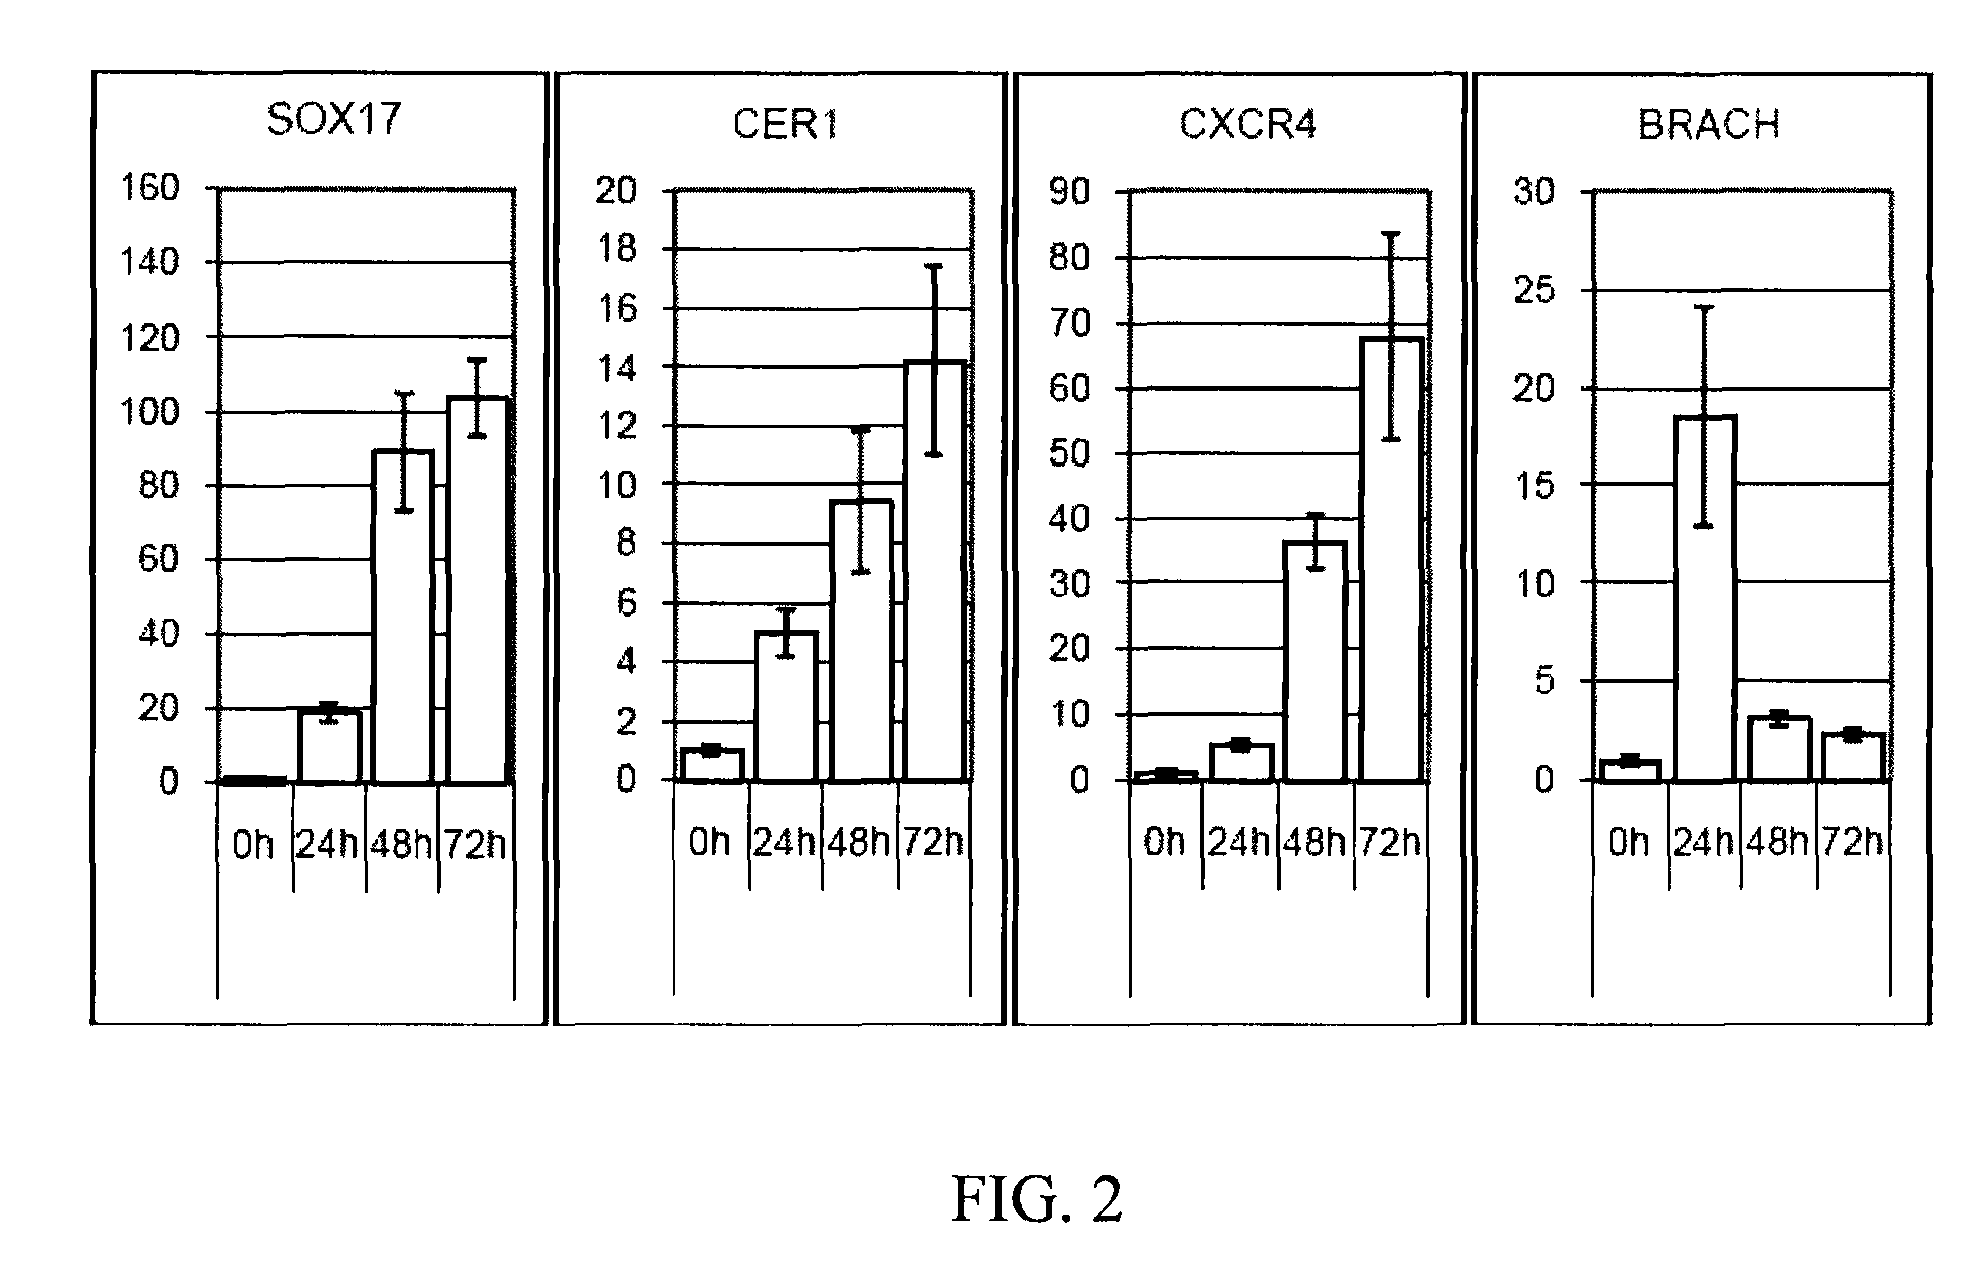 Methods of deriving definitive endoderm cells from pluripotent parthenogenetic stem cells